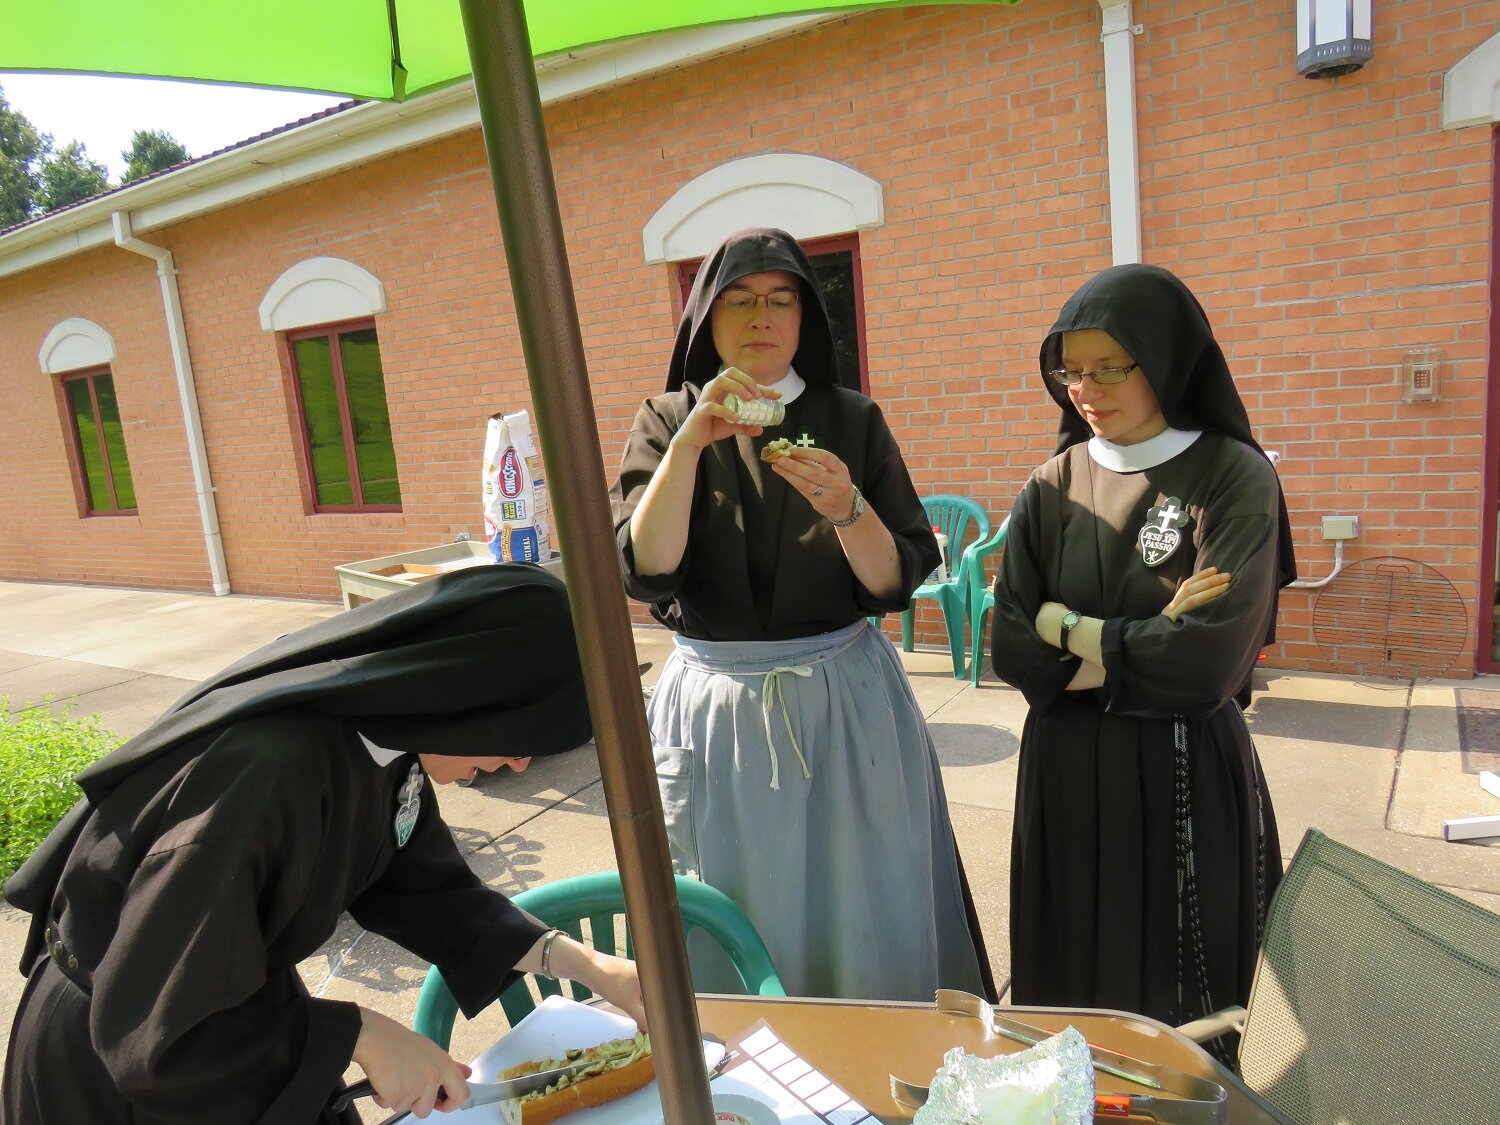  Sister Maria Faustina slices up the snacks for Mother John Mary and Sister Frances Marie 